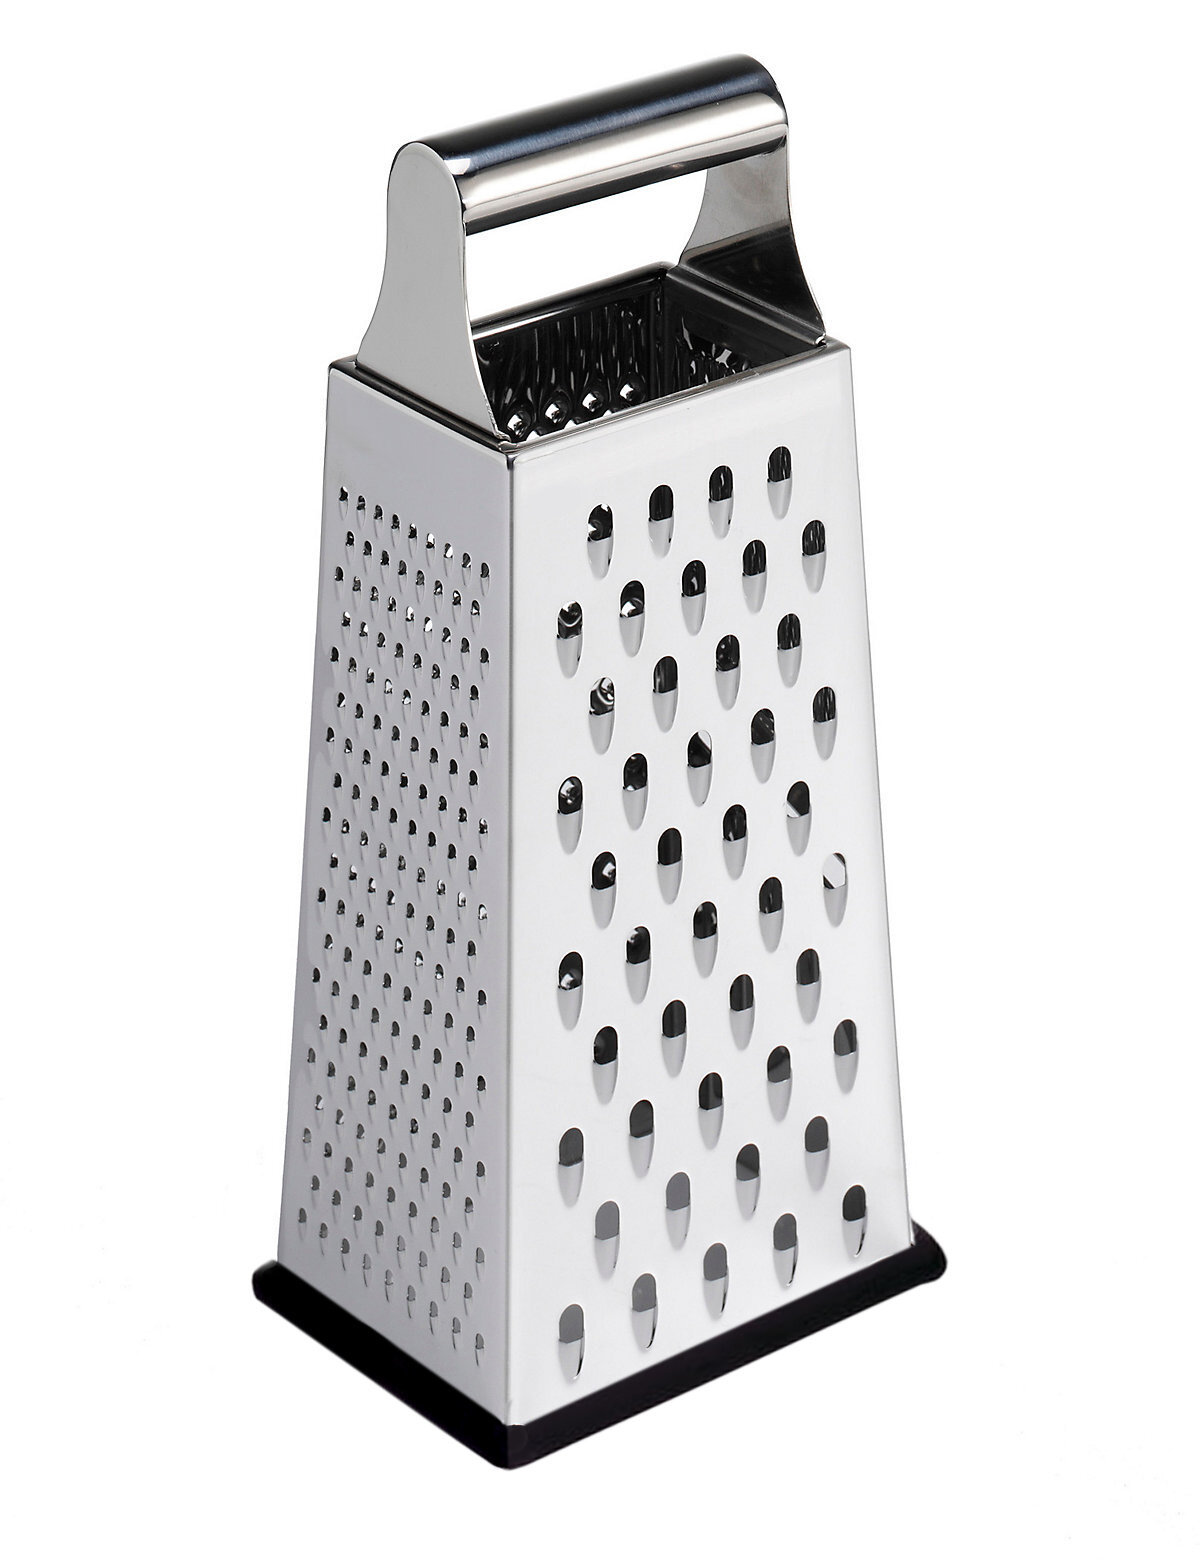 Blue Ourokhome Large Box Grater-4 Sided Large Cheese Grater with a Container Box